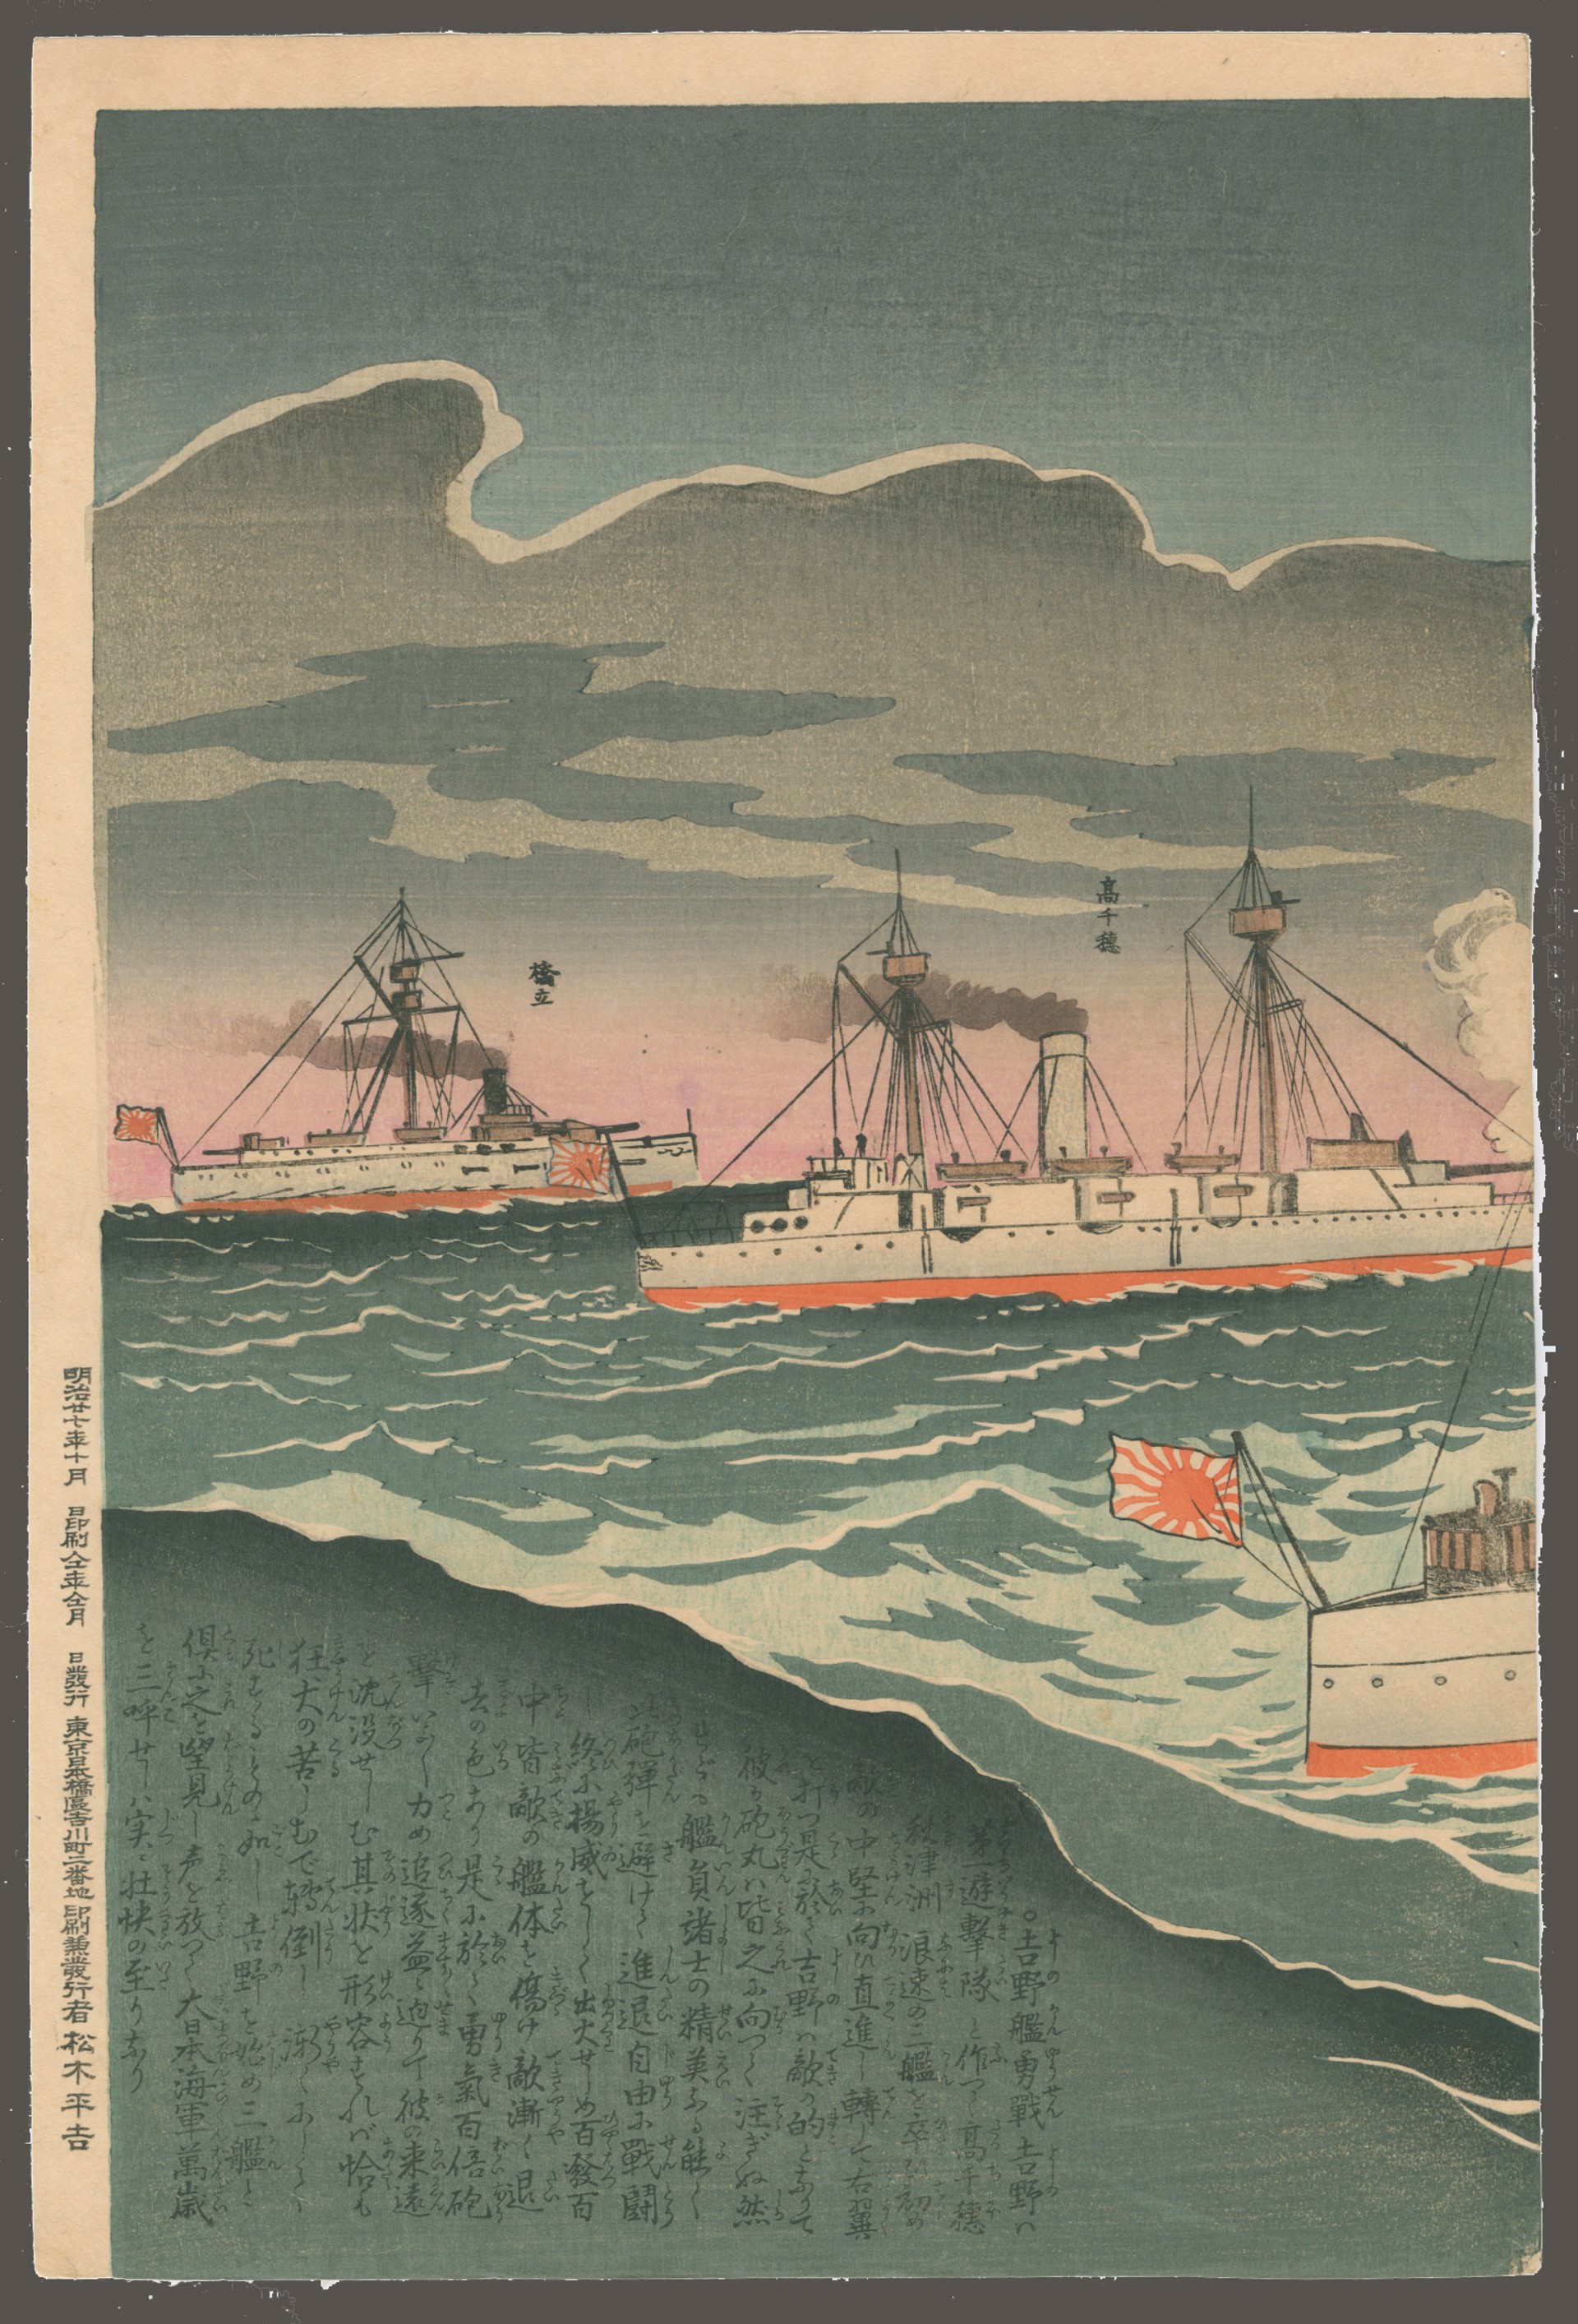 Great Victory of Our Forces at the Battle of the Yellow Sea - 4th Illustration Sino - Japanese war by Kiyochika